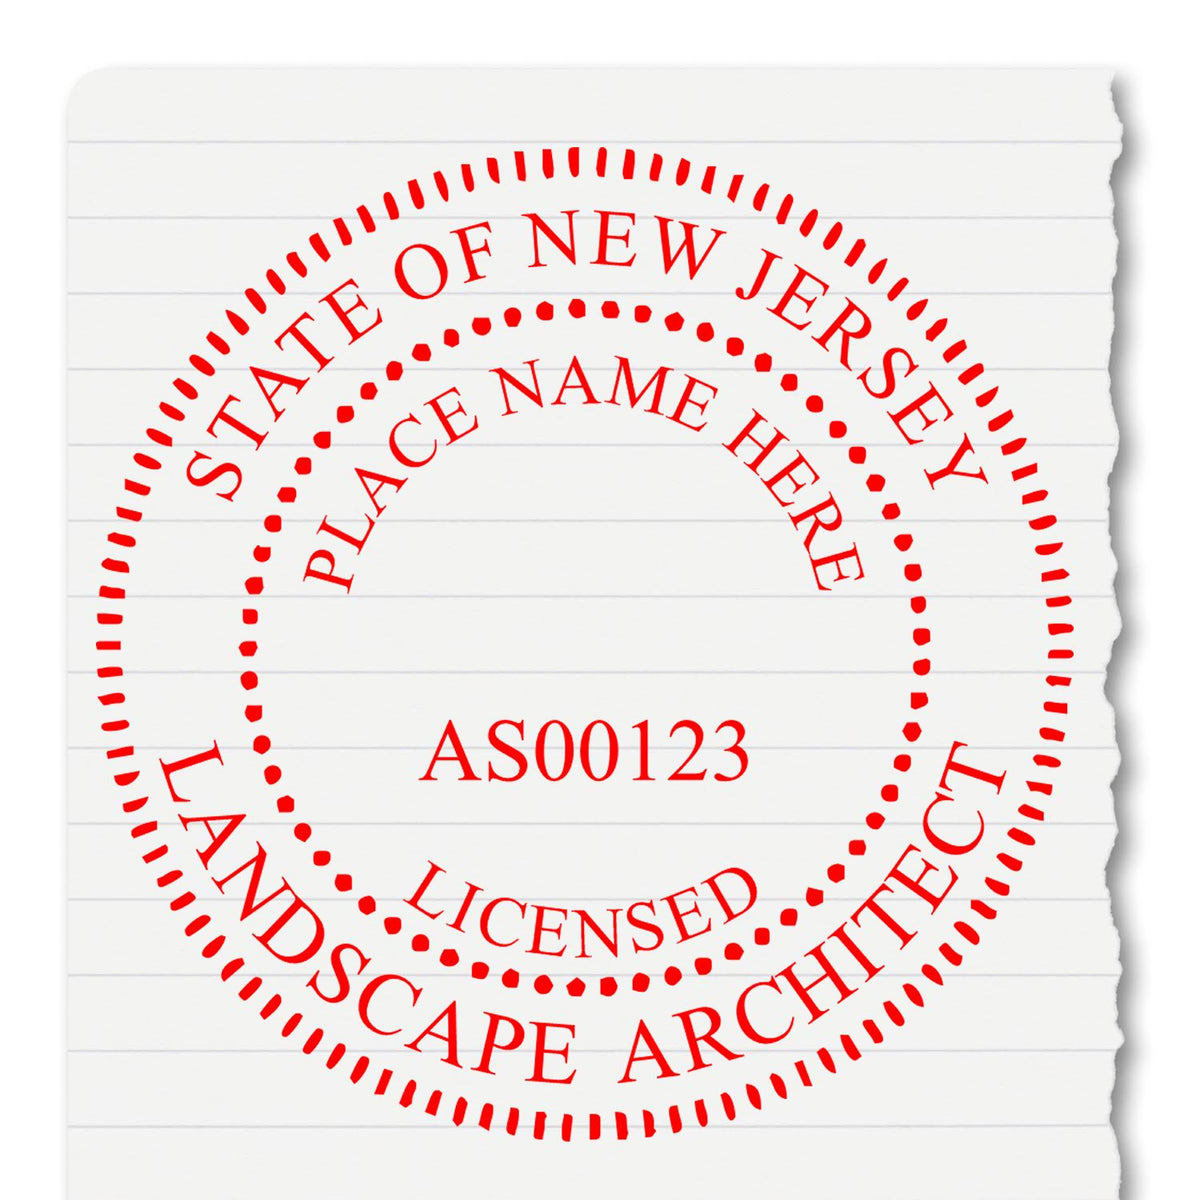 The New Jersey Landscape Architectural Seal Stamp stamp impression comes to life with a crisp, detailed photo on paper - showcasing true professional quality.